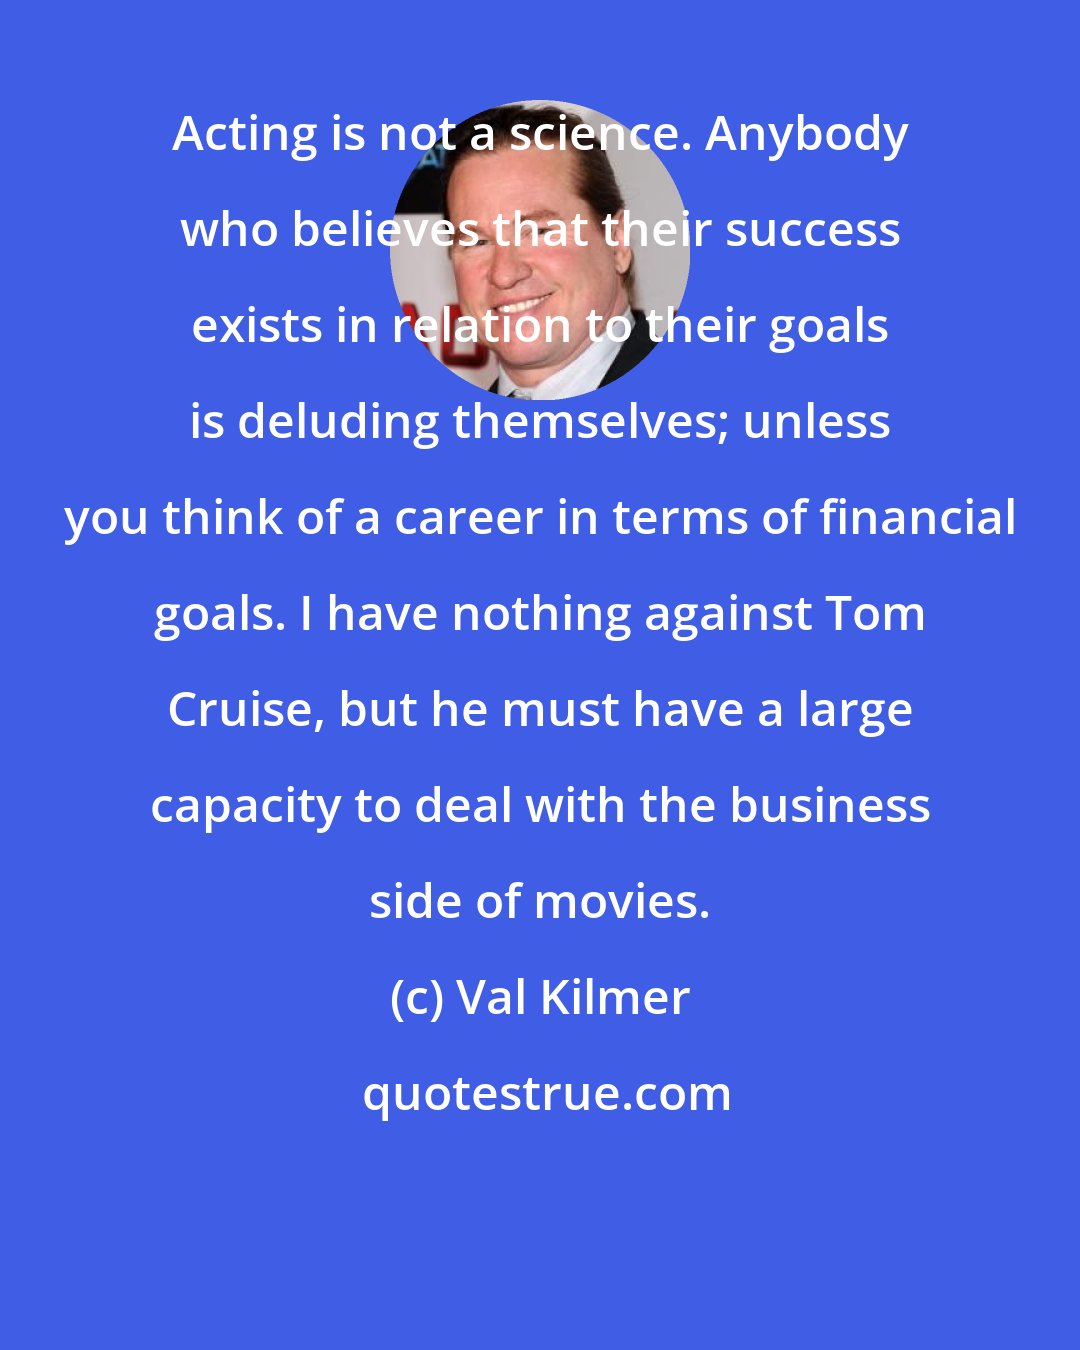 Val Kilmer: Acting is not a science. Anybody who believes that their success exists in relation to their goals is deluding themselves; unless you think of a career in terms of financial goals. I have nothing against Tom Cruise, but he must have a large capacity to deal with the business side of movies.